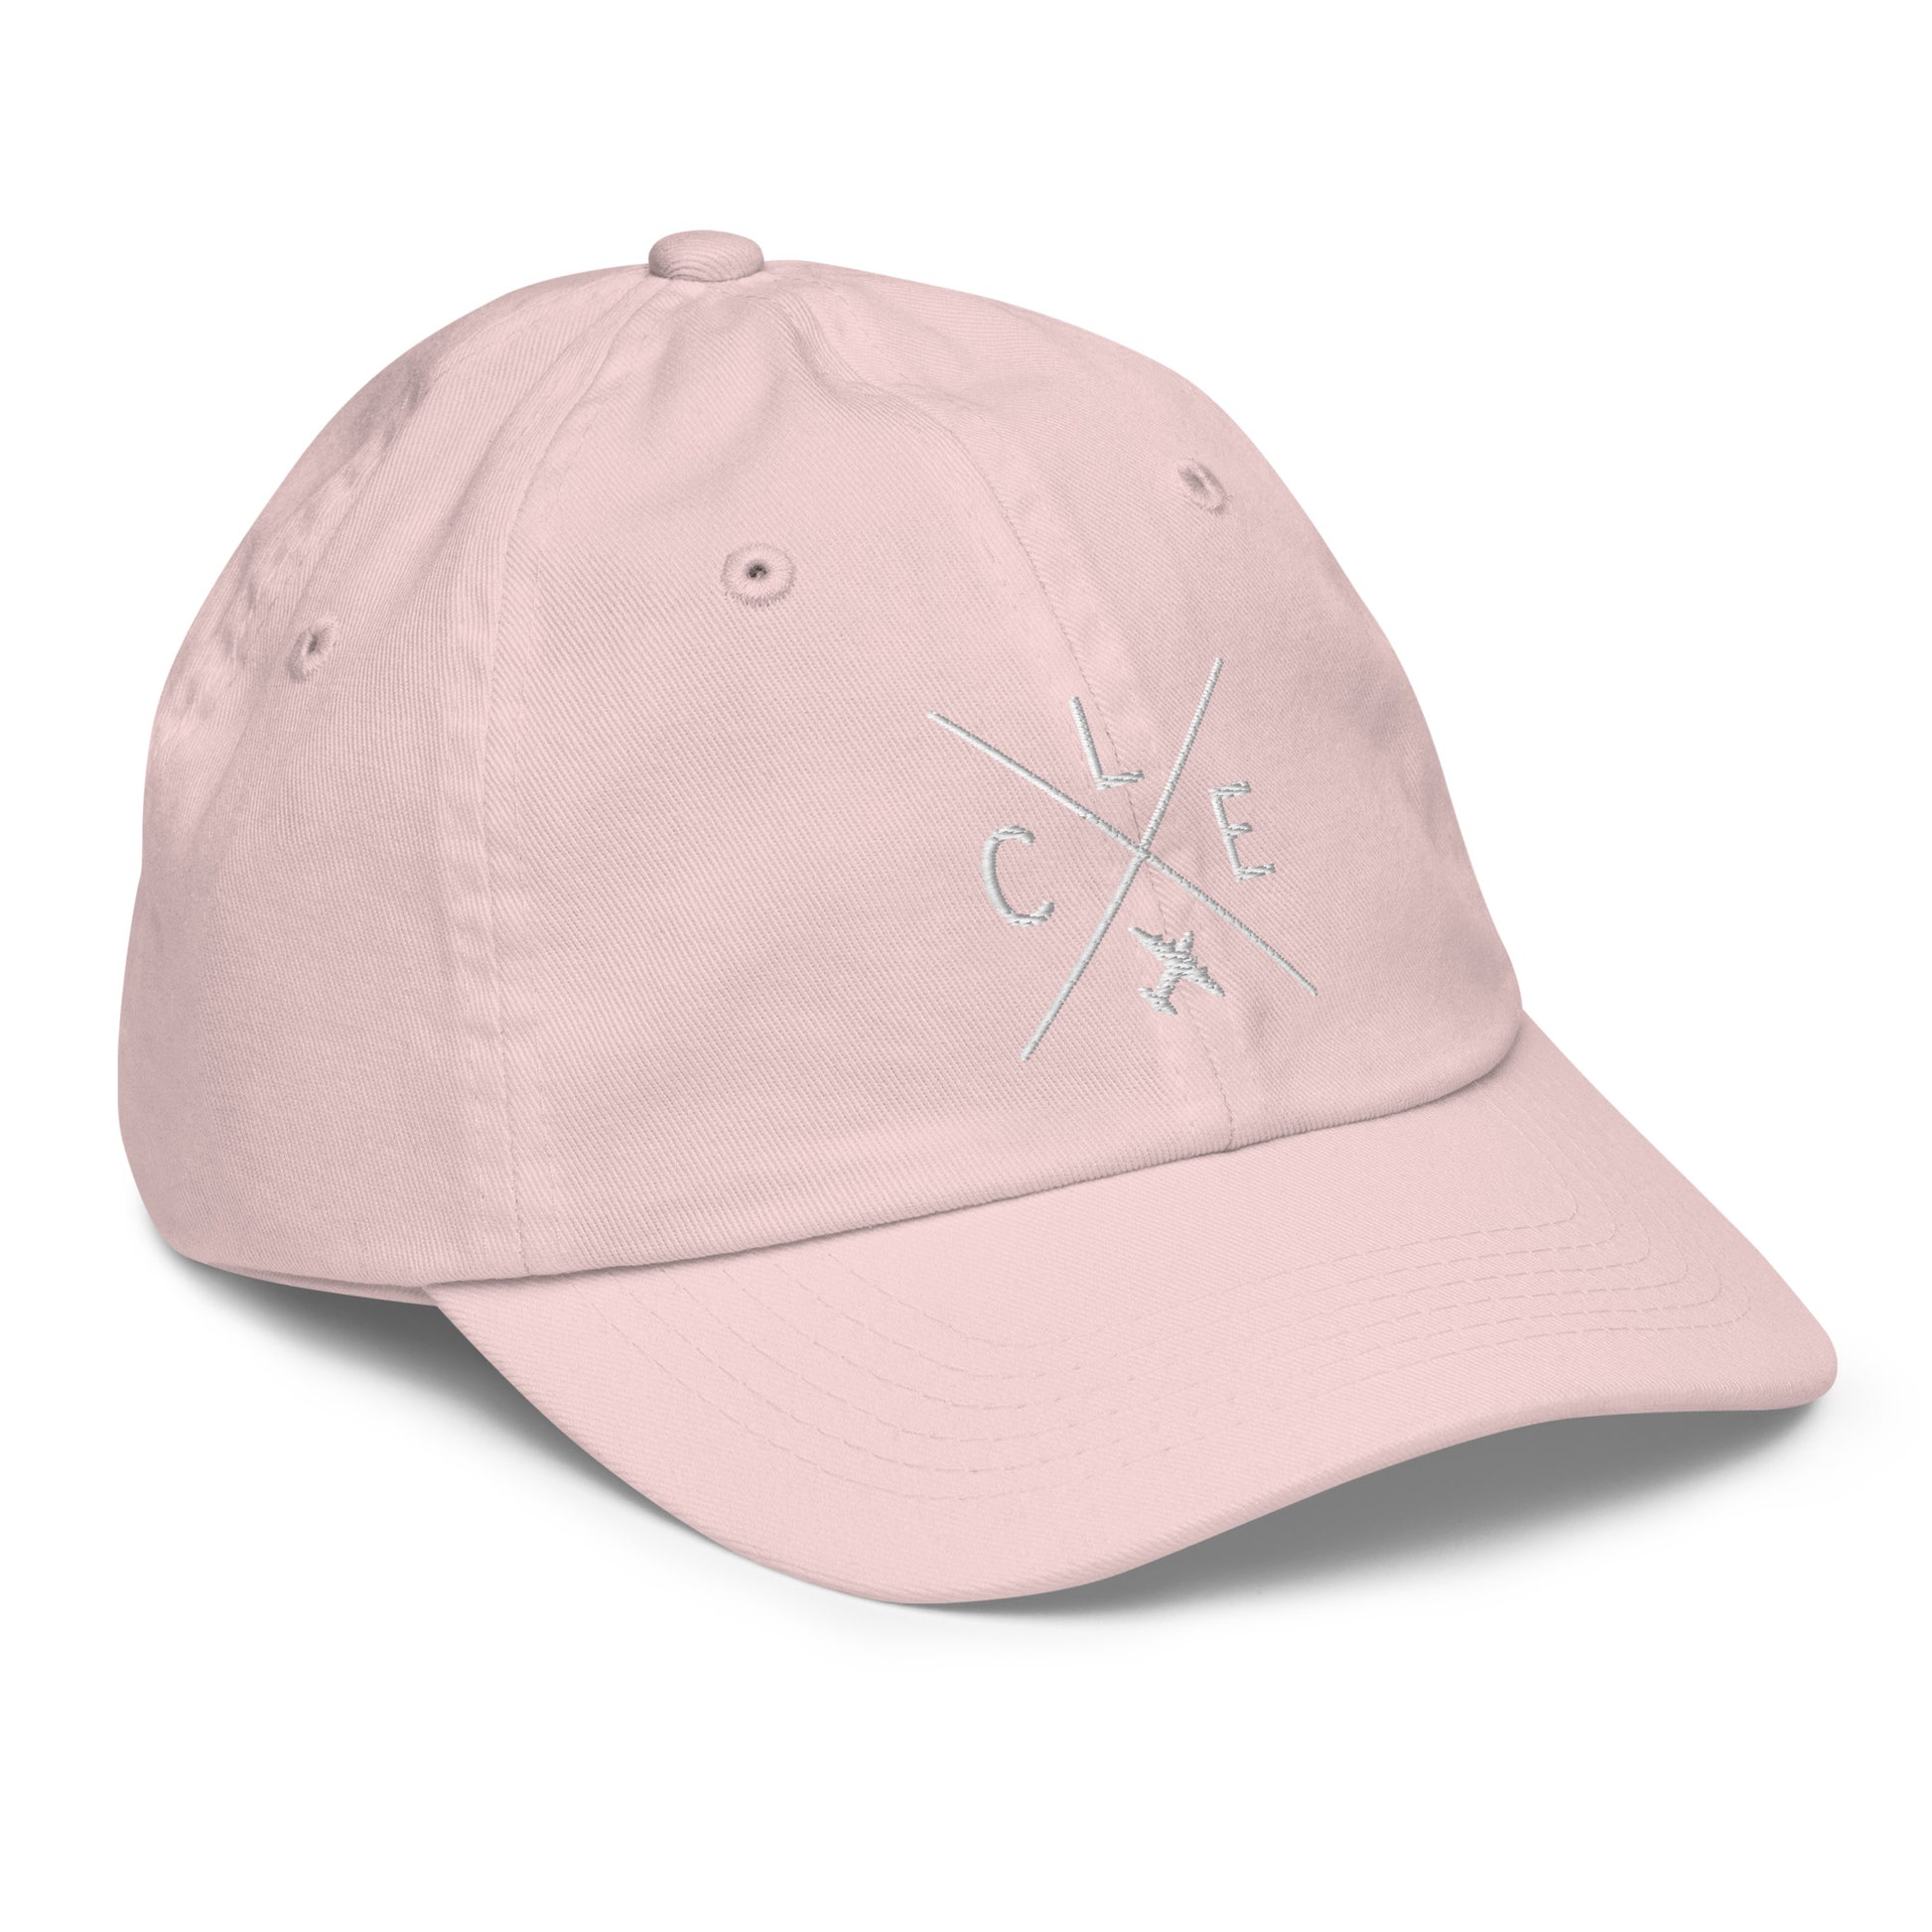 Crossed-X Kid's Baseball Cap - White • CLE Cleveland • YHM Designs - Image 32